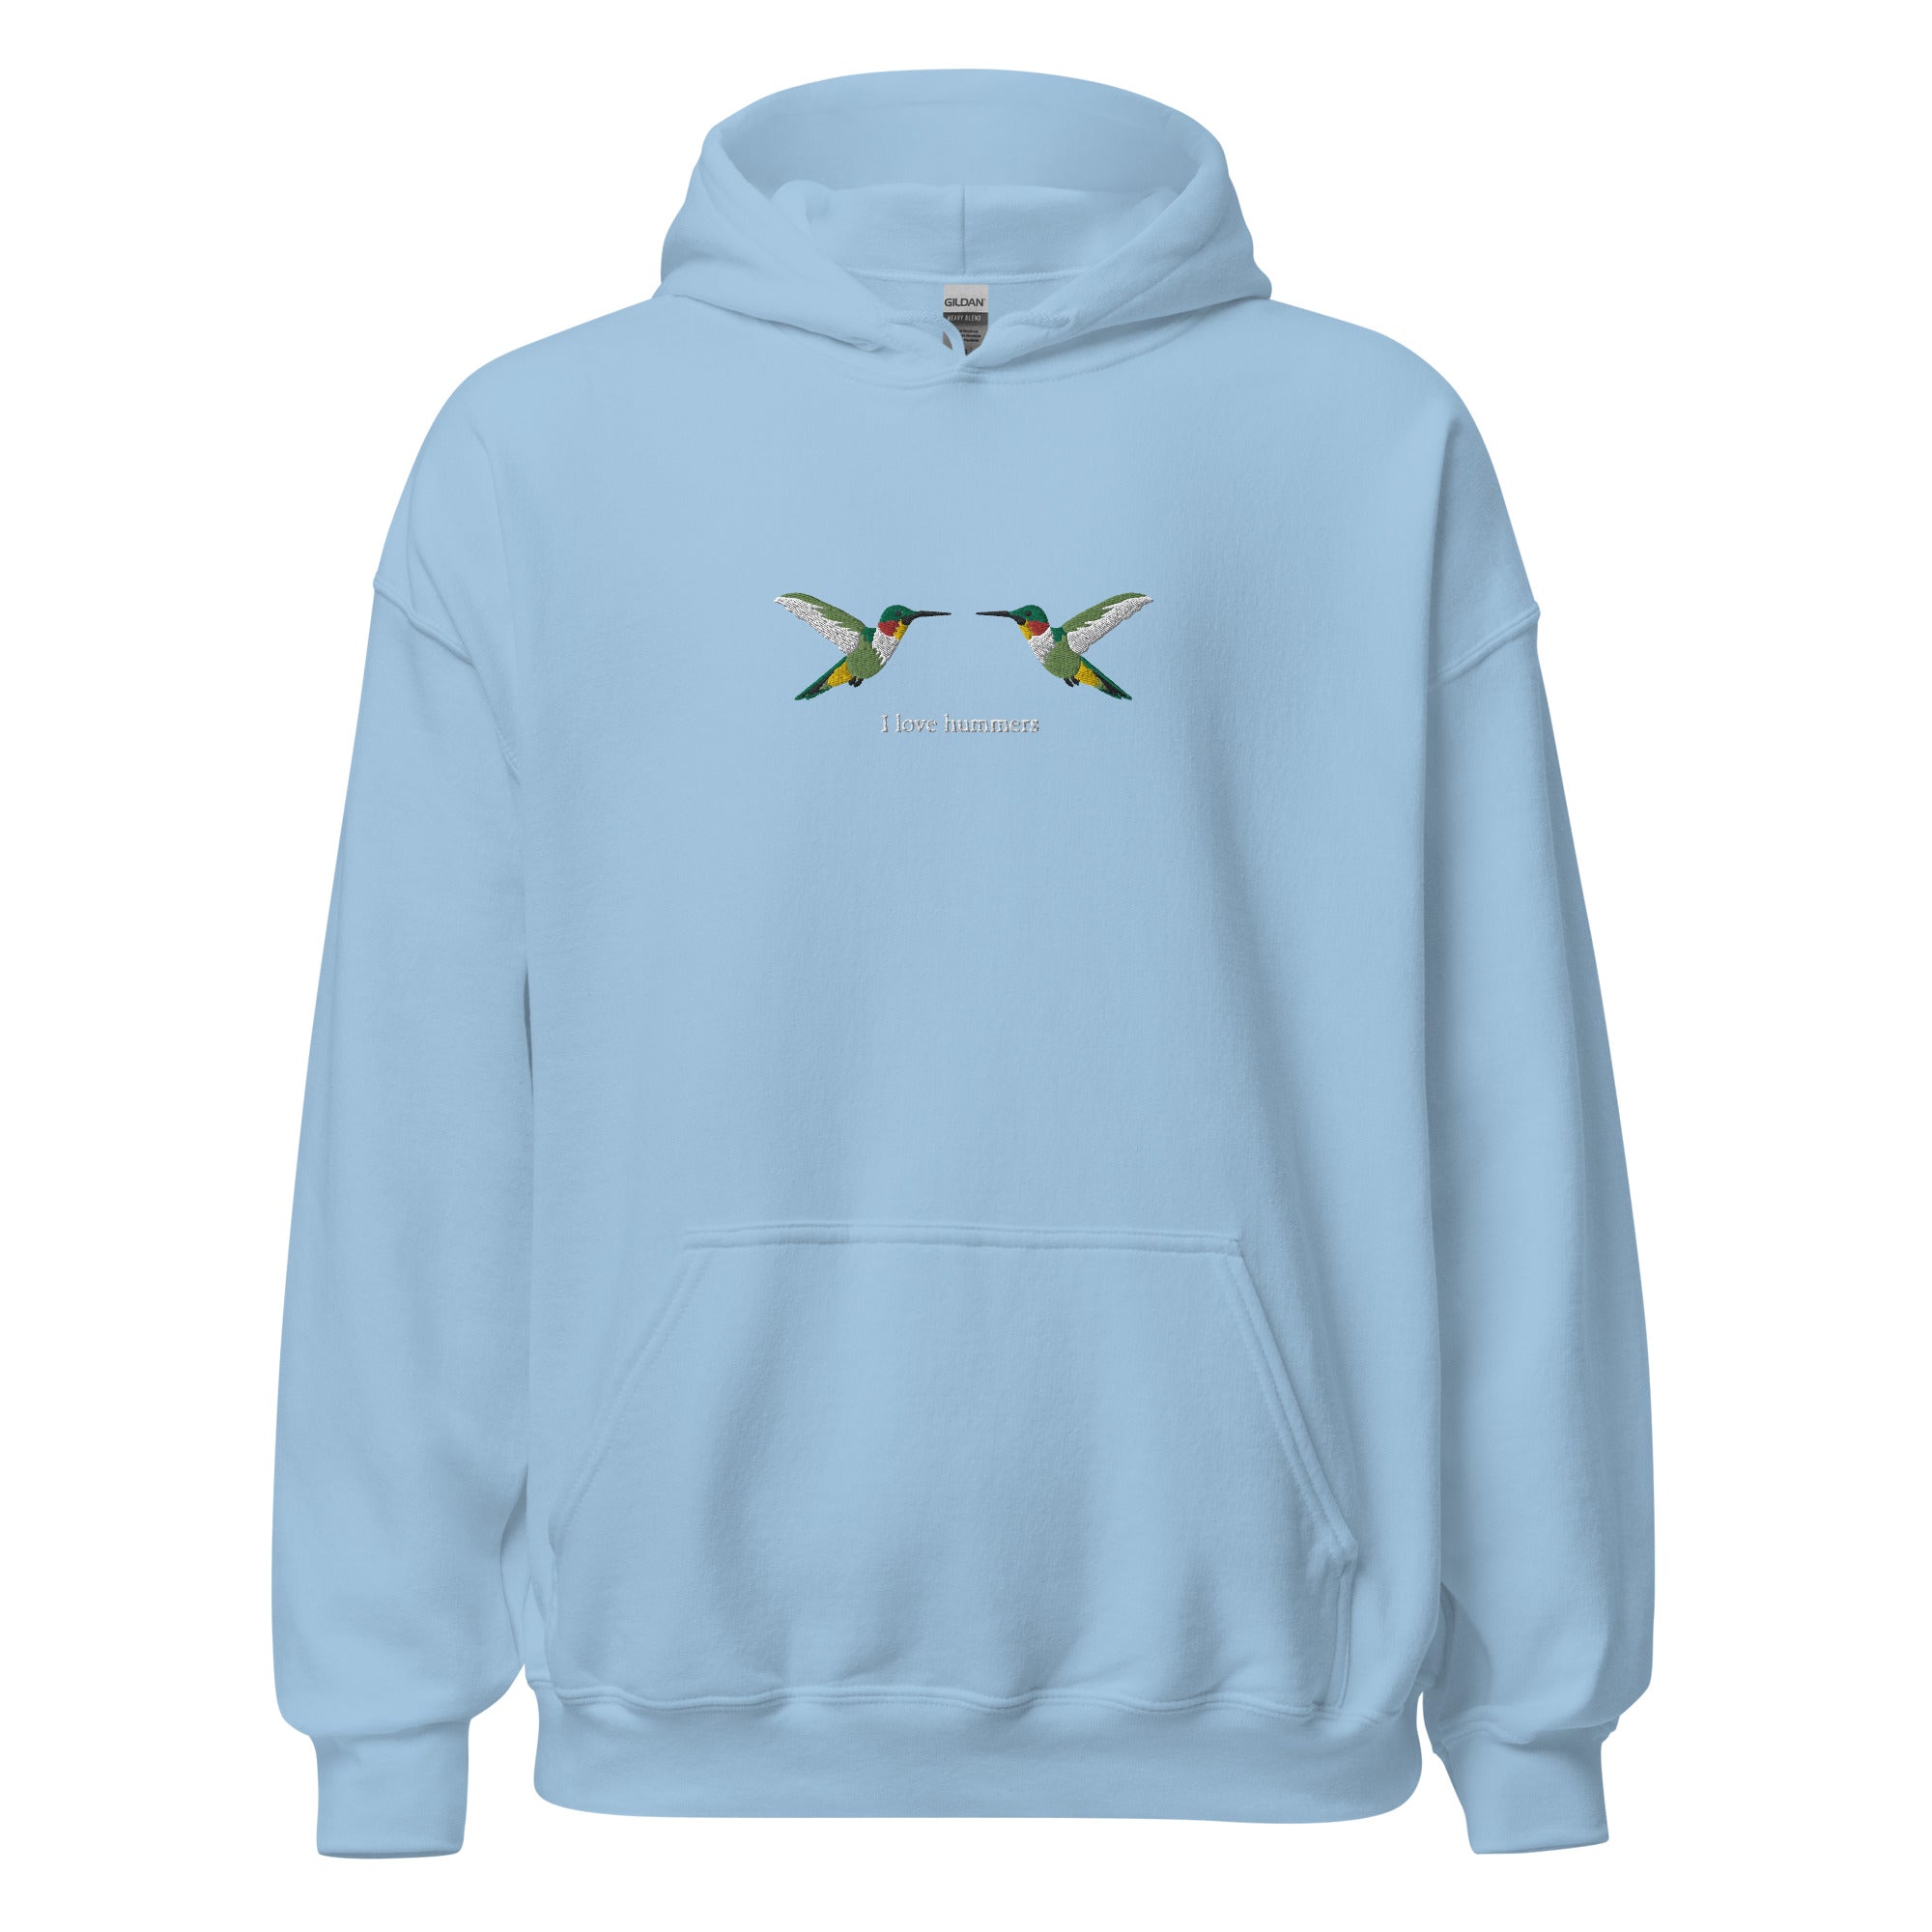 I love hummers Embroidered Unisex Hoodie